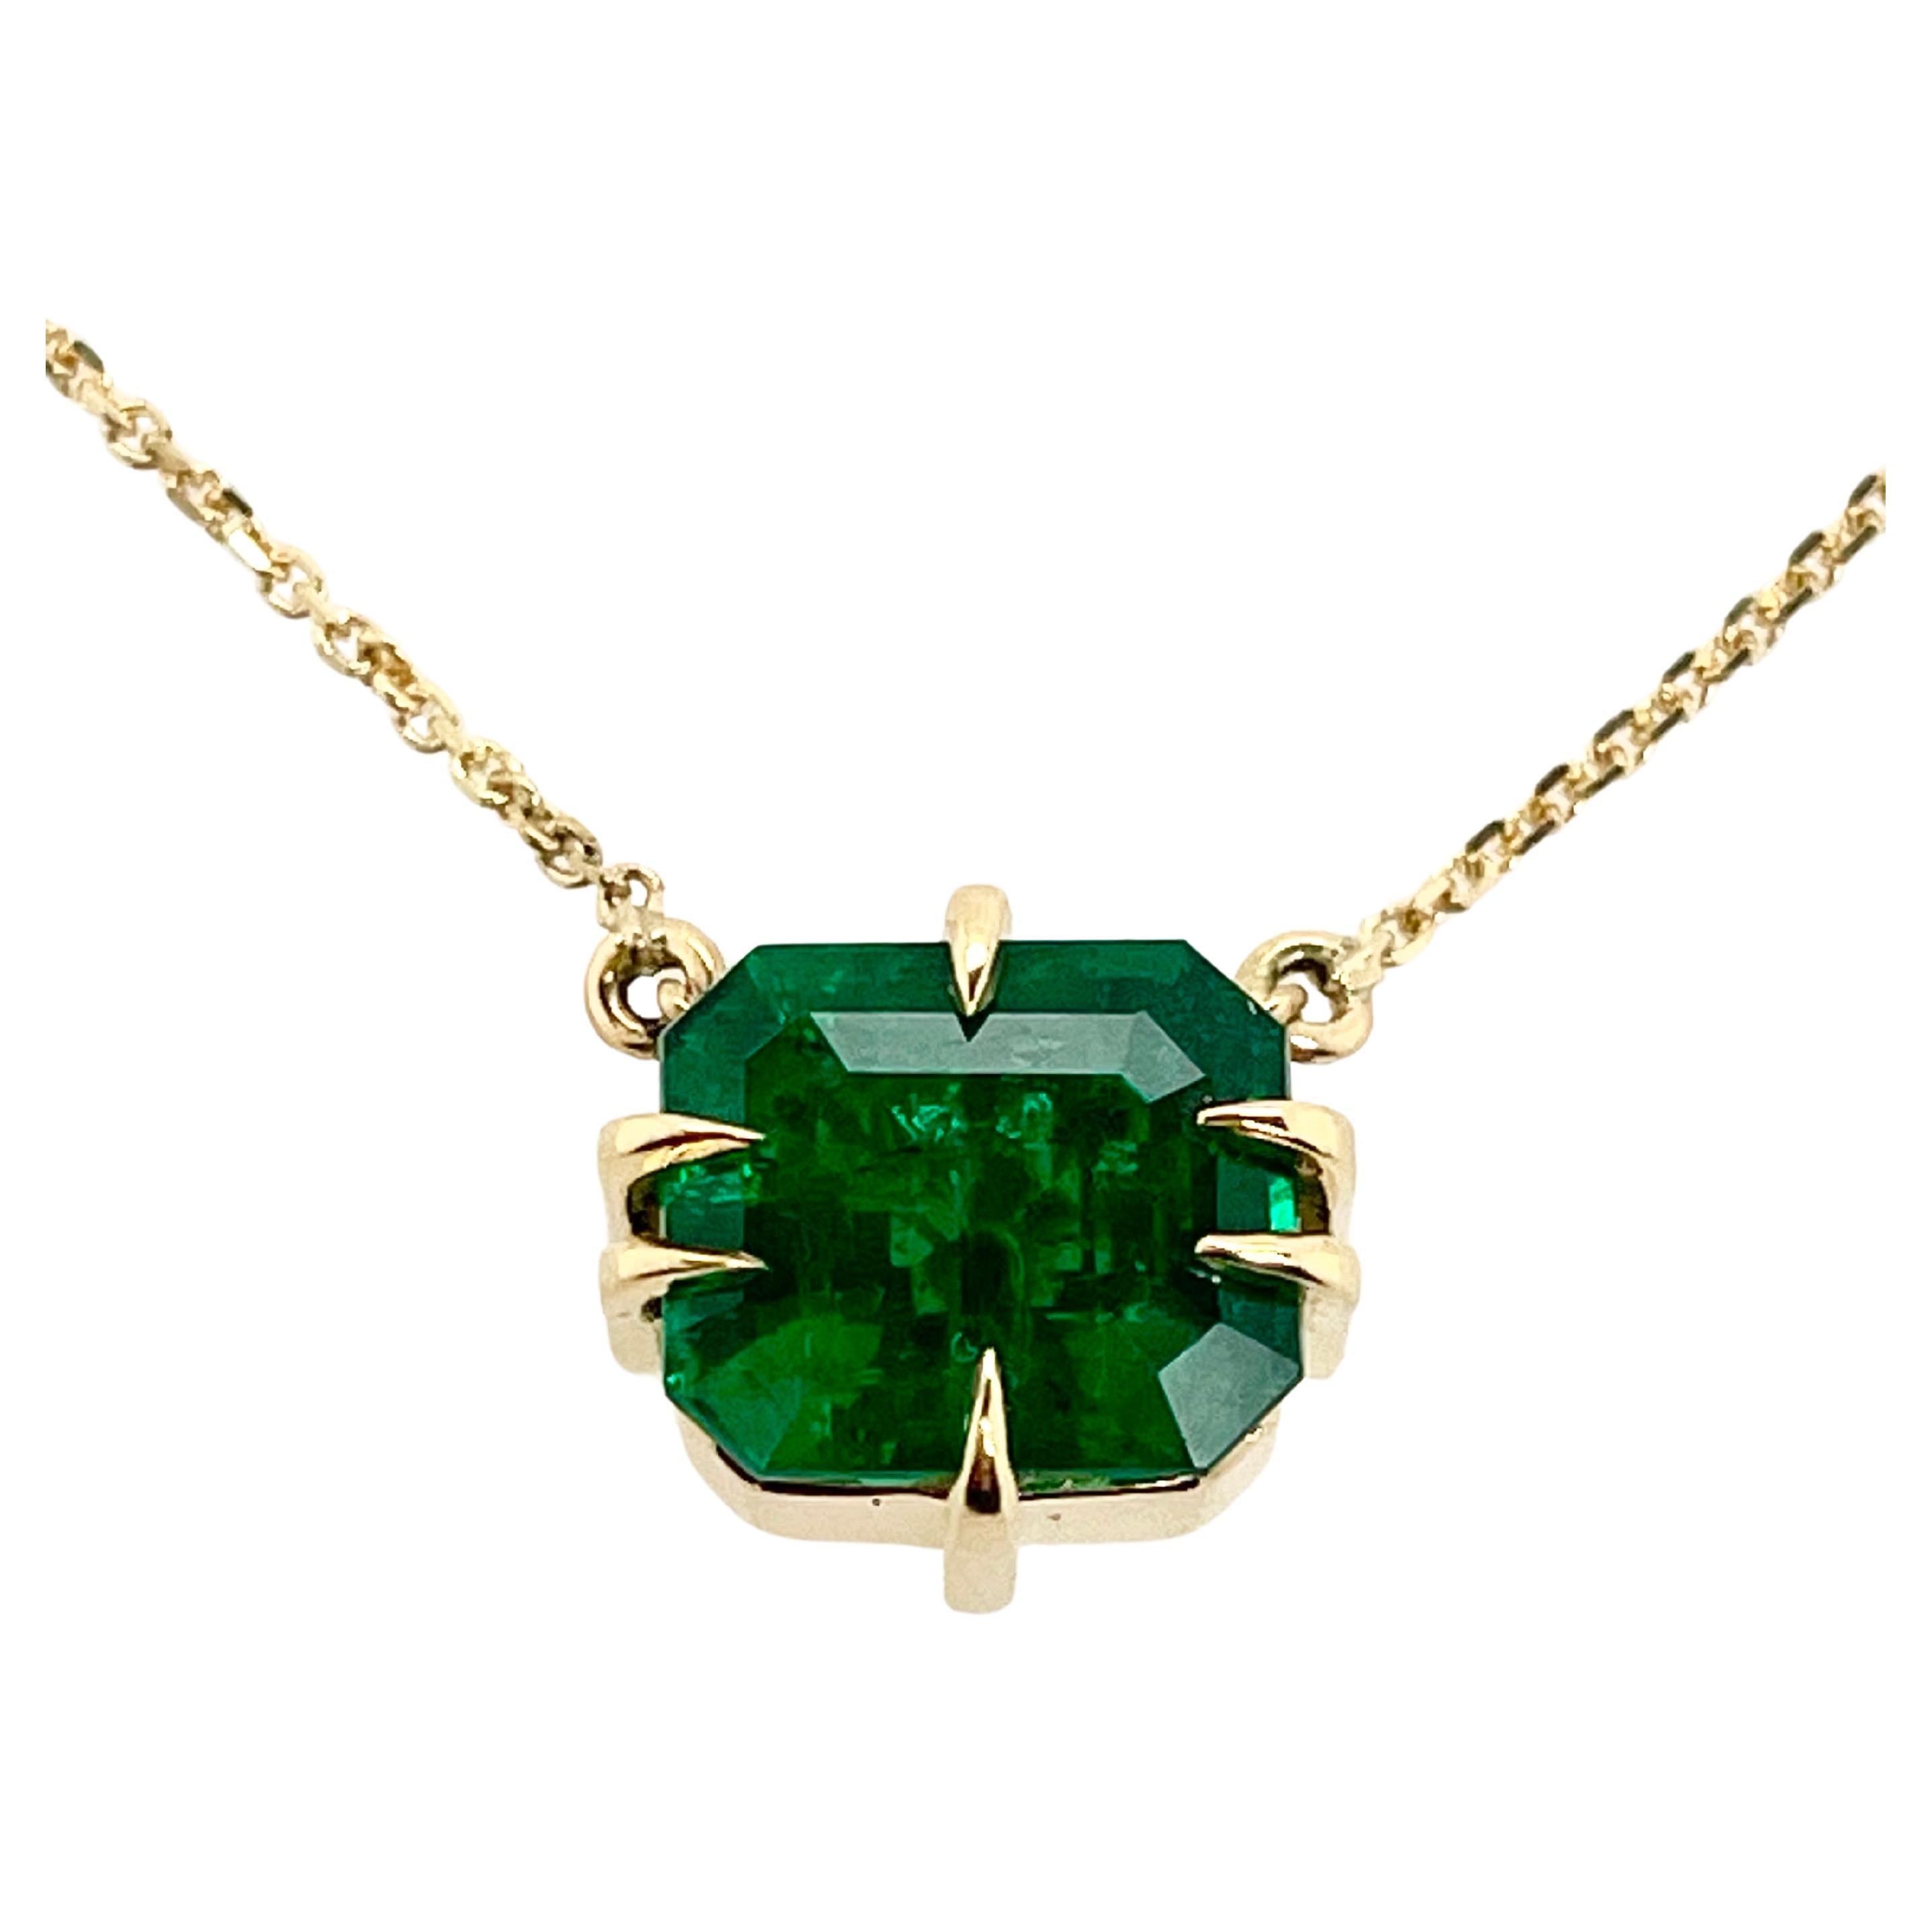 2.26ct Emerald necklace made in 18k yellow gold with chain 